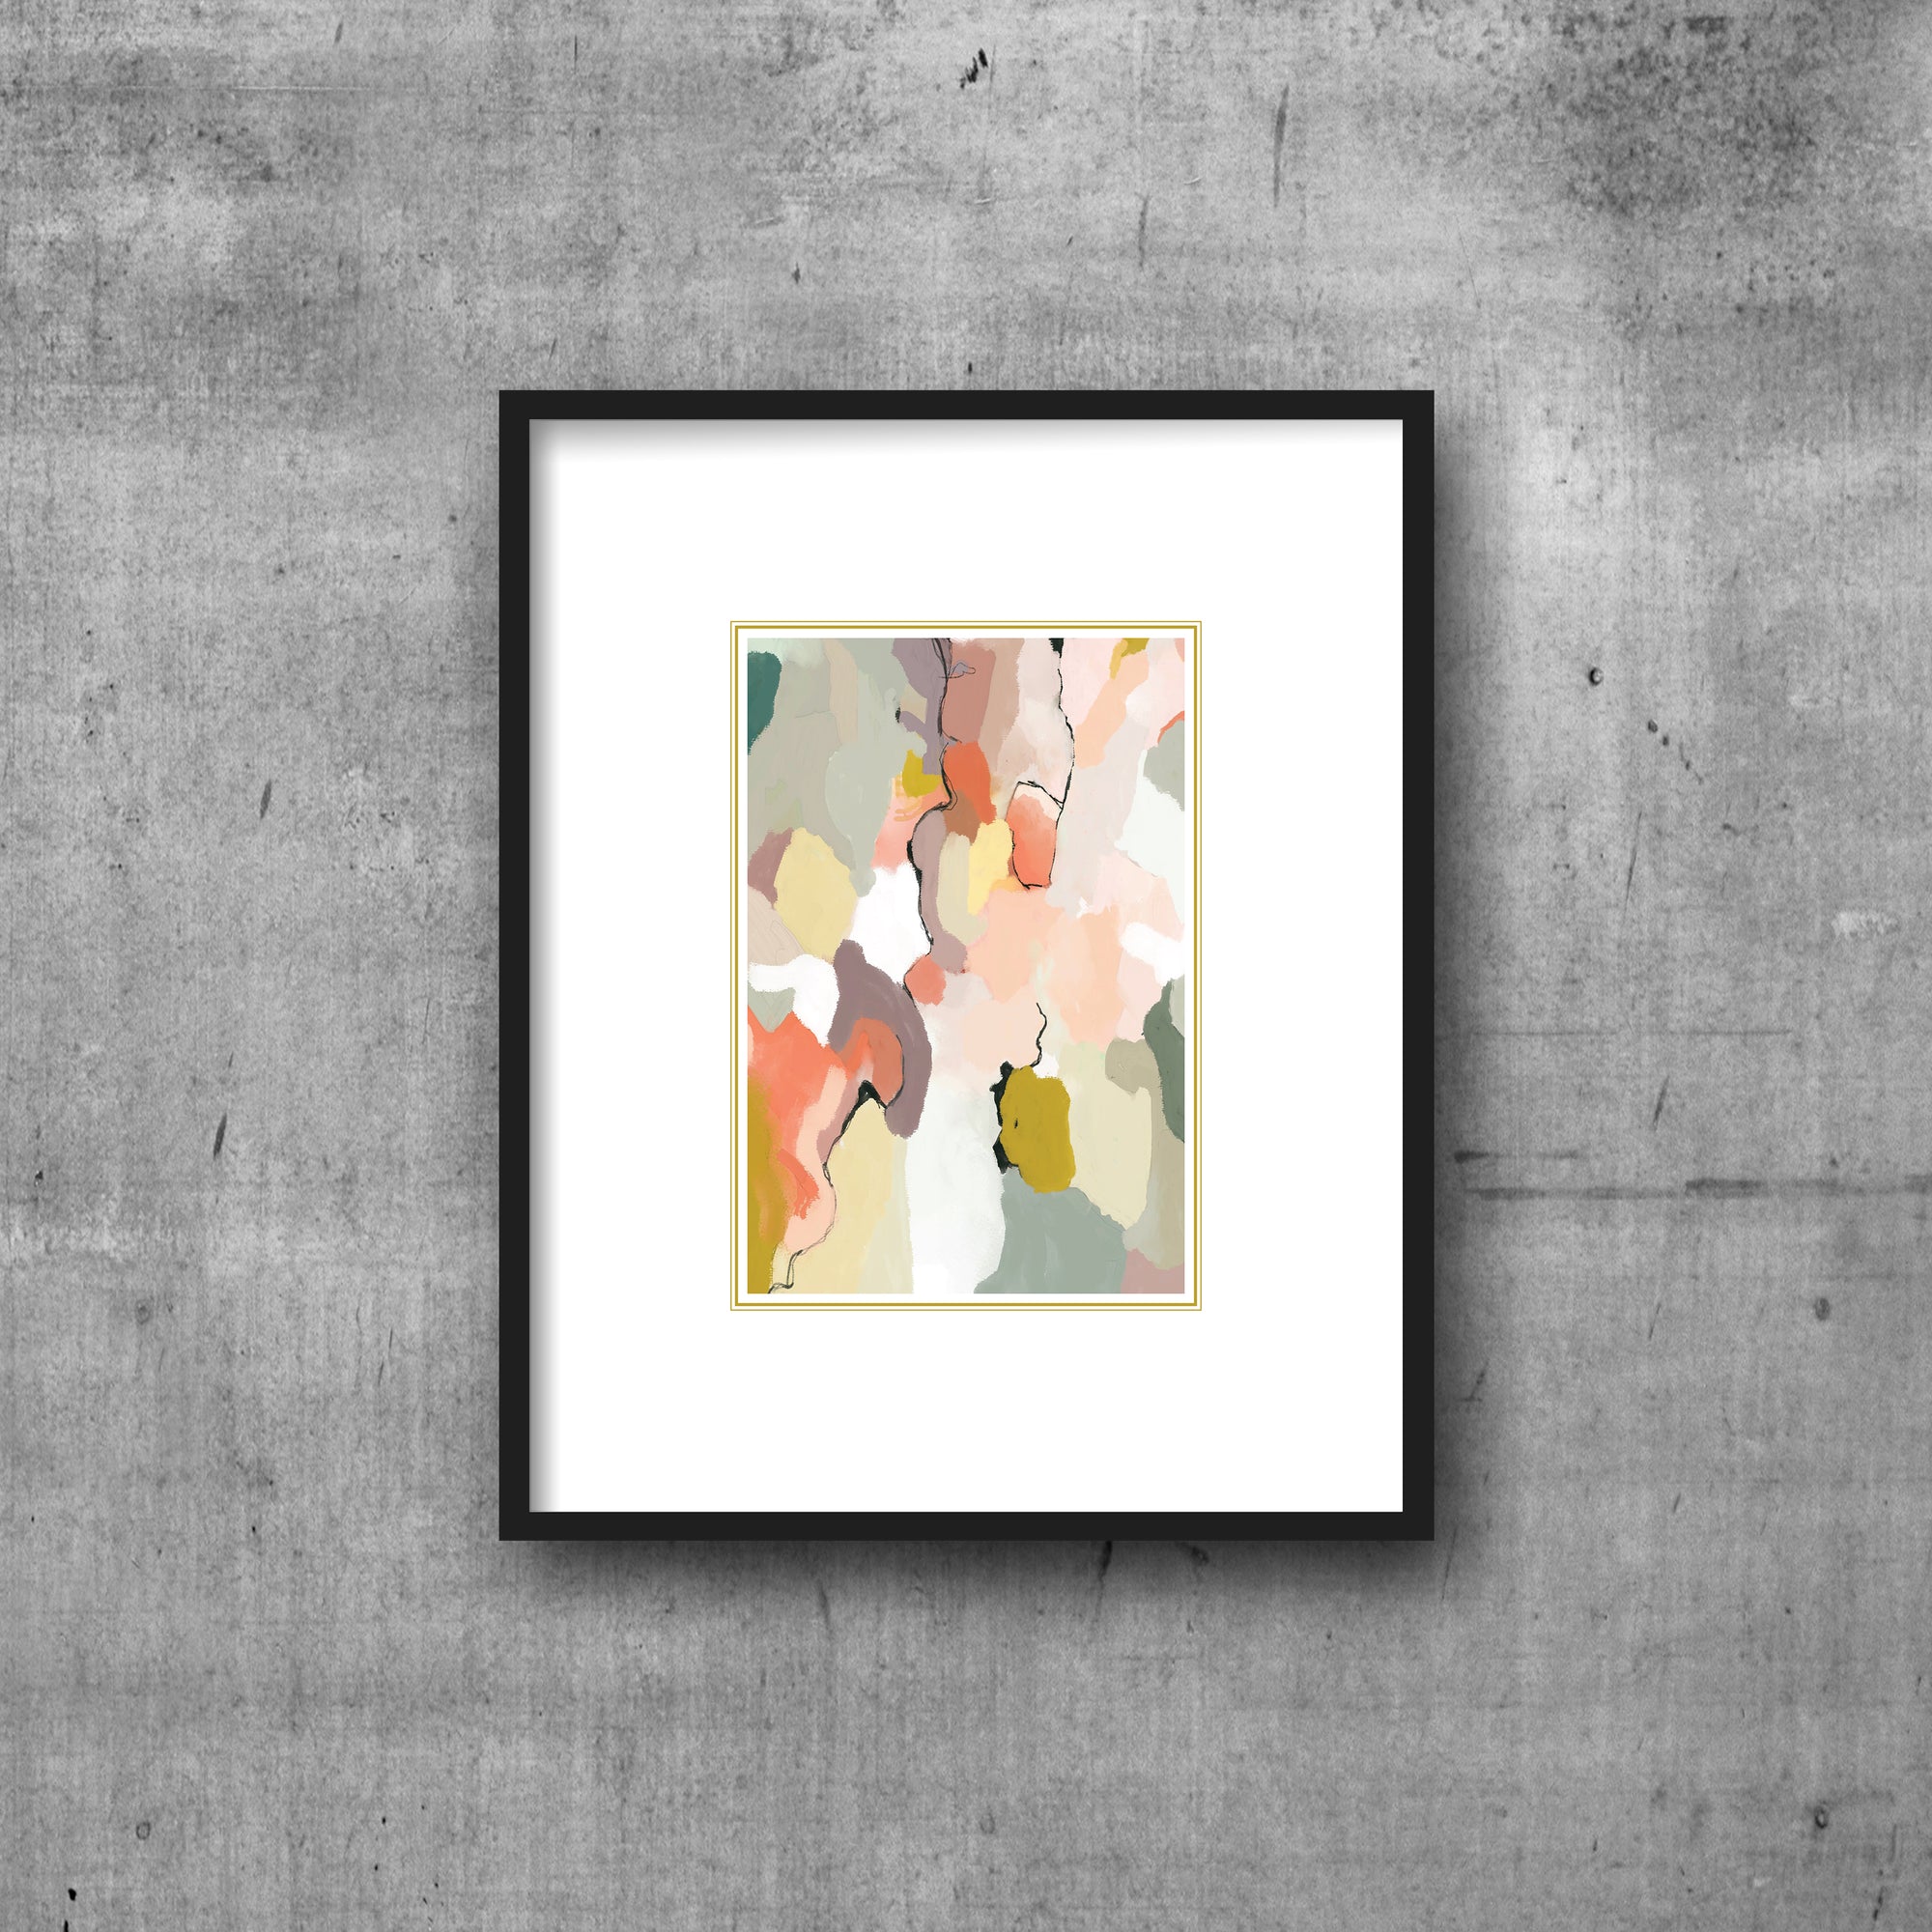 Art print with white border framing coral, sage abstract pattern with gold frame. Hanging by clips.